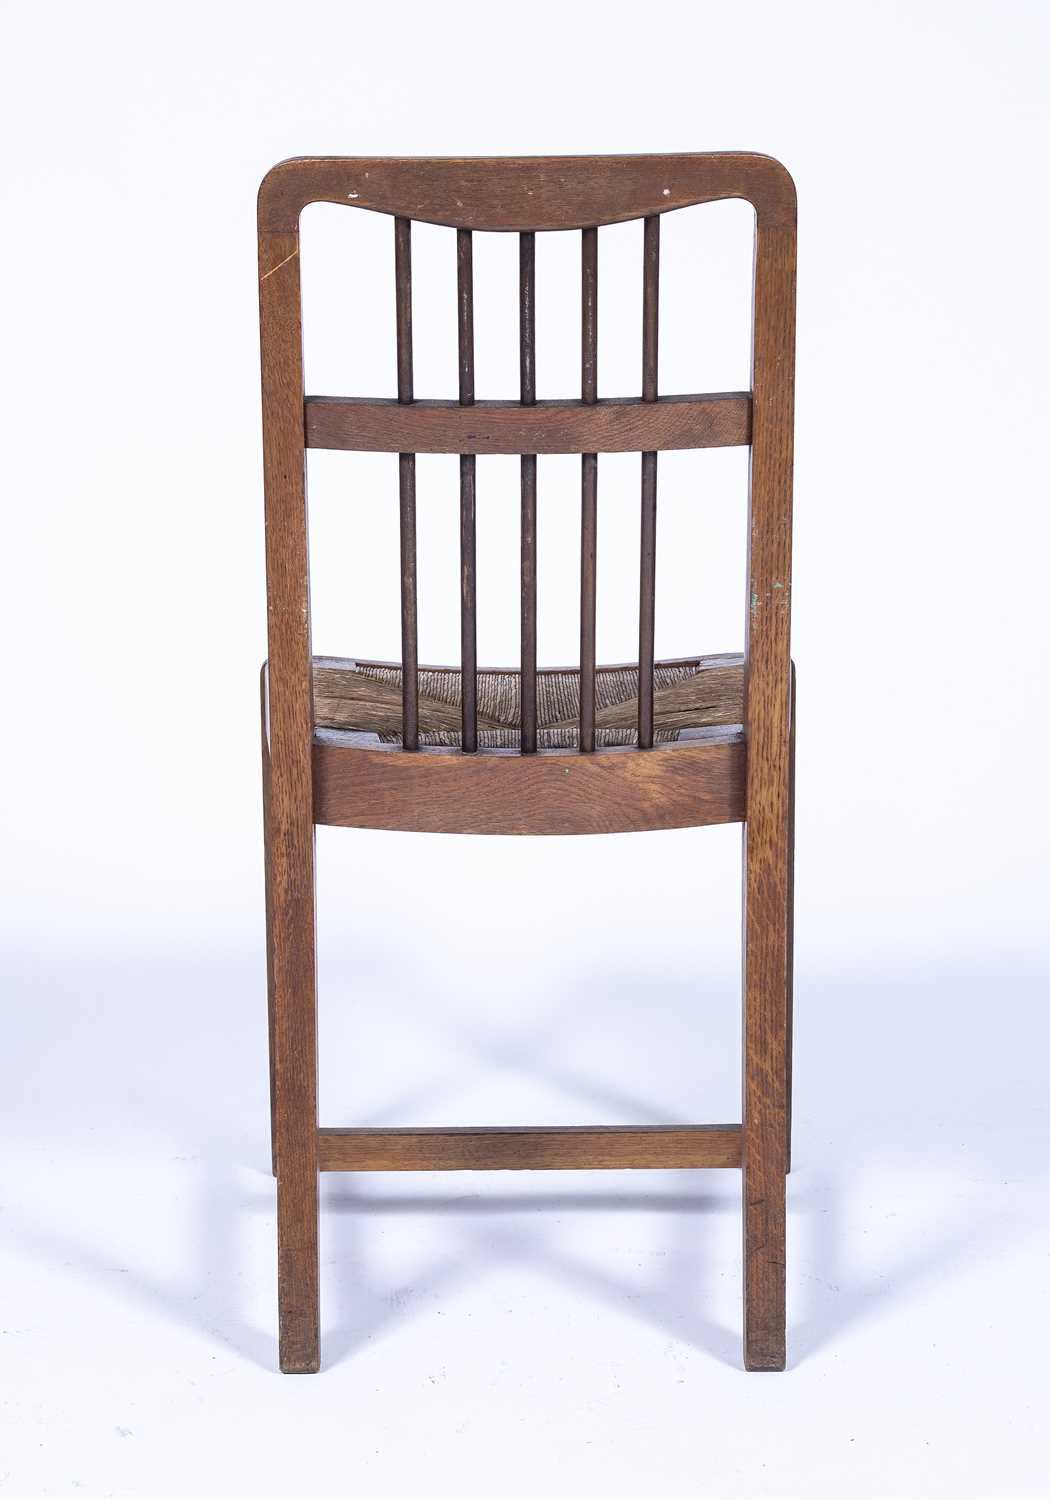 Arts & Crafts oak framed chair with spindle back and drop-in raffia seat, unmarked, 85cm - Image 2 of 2